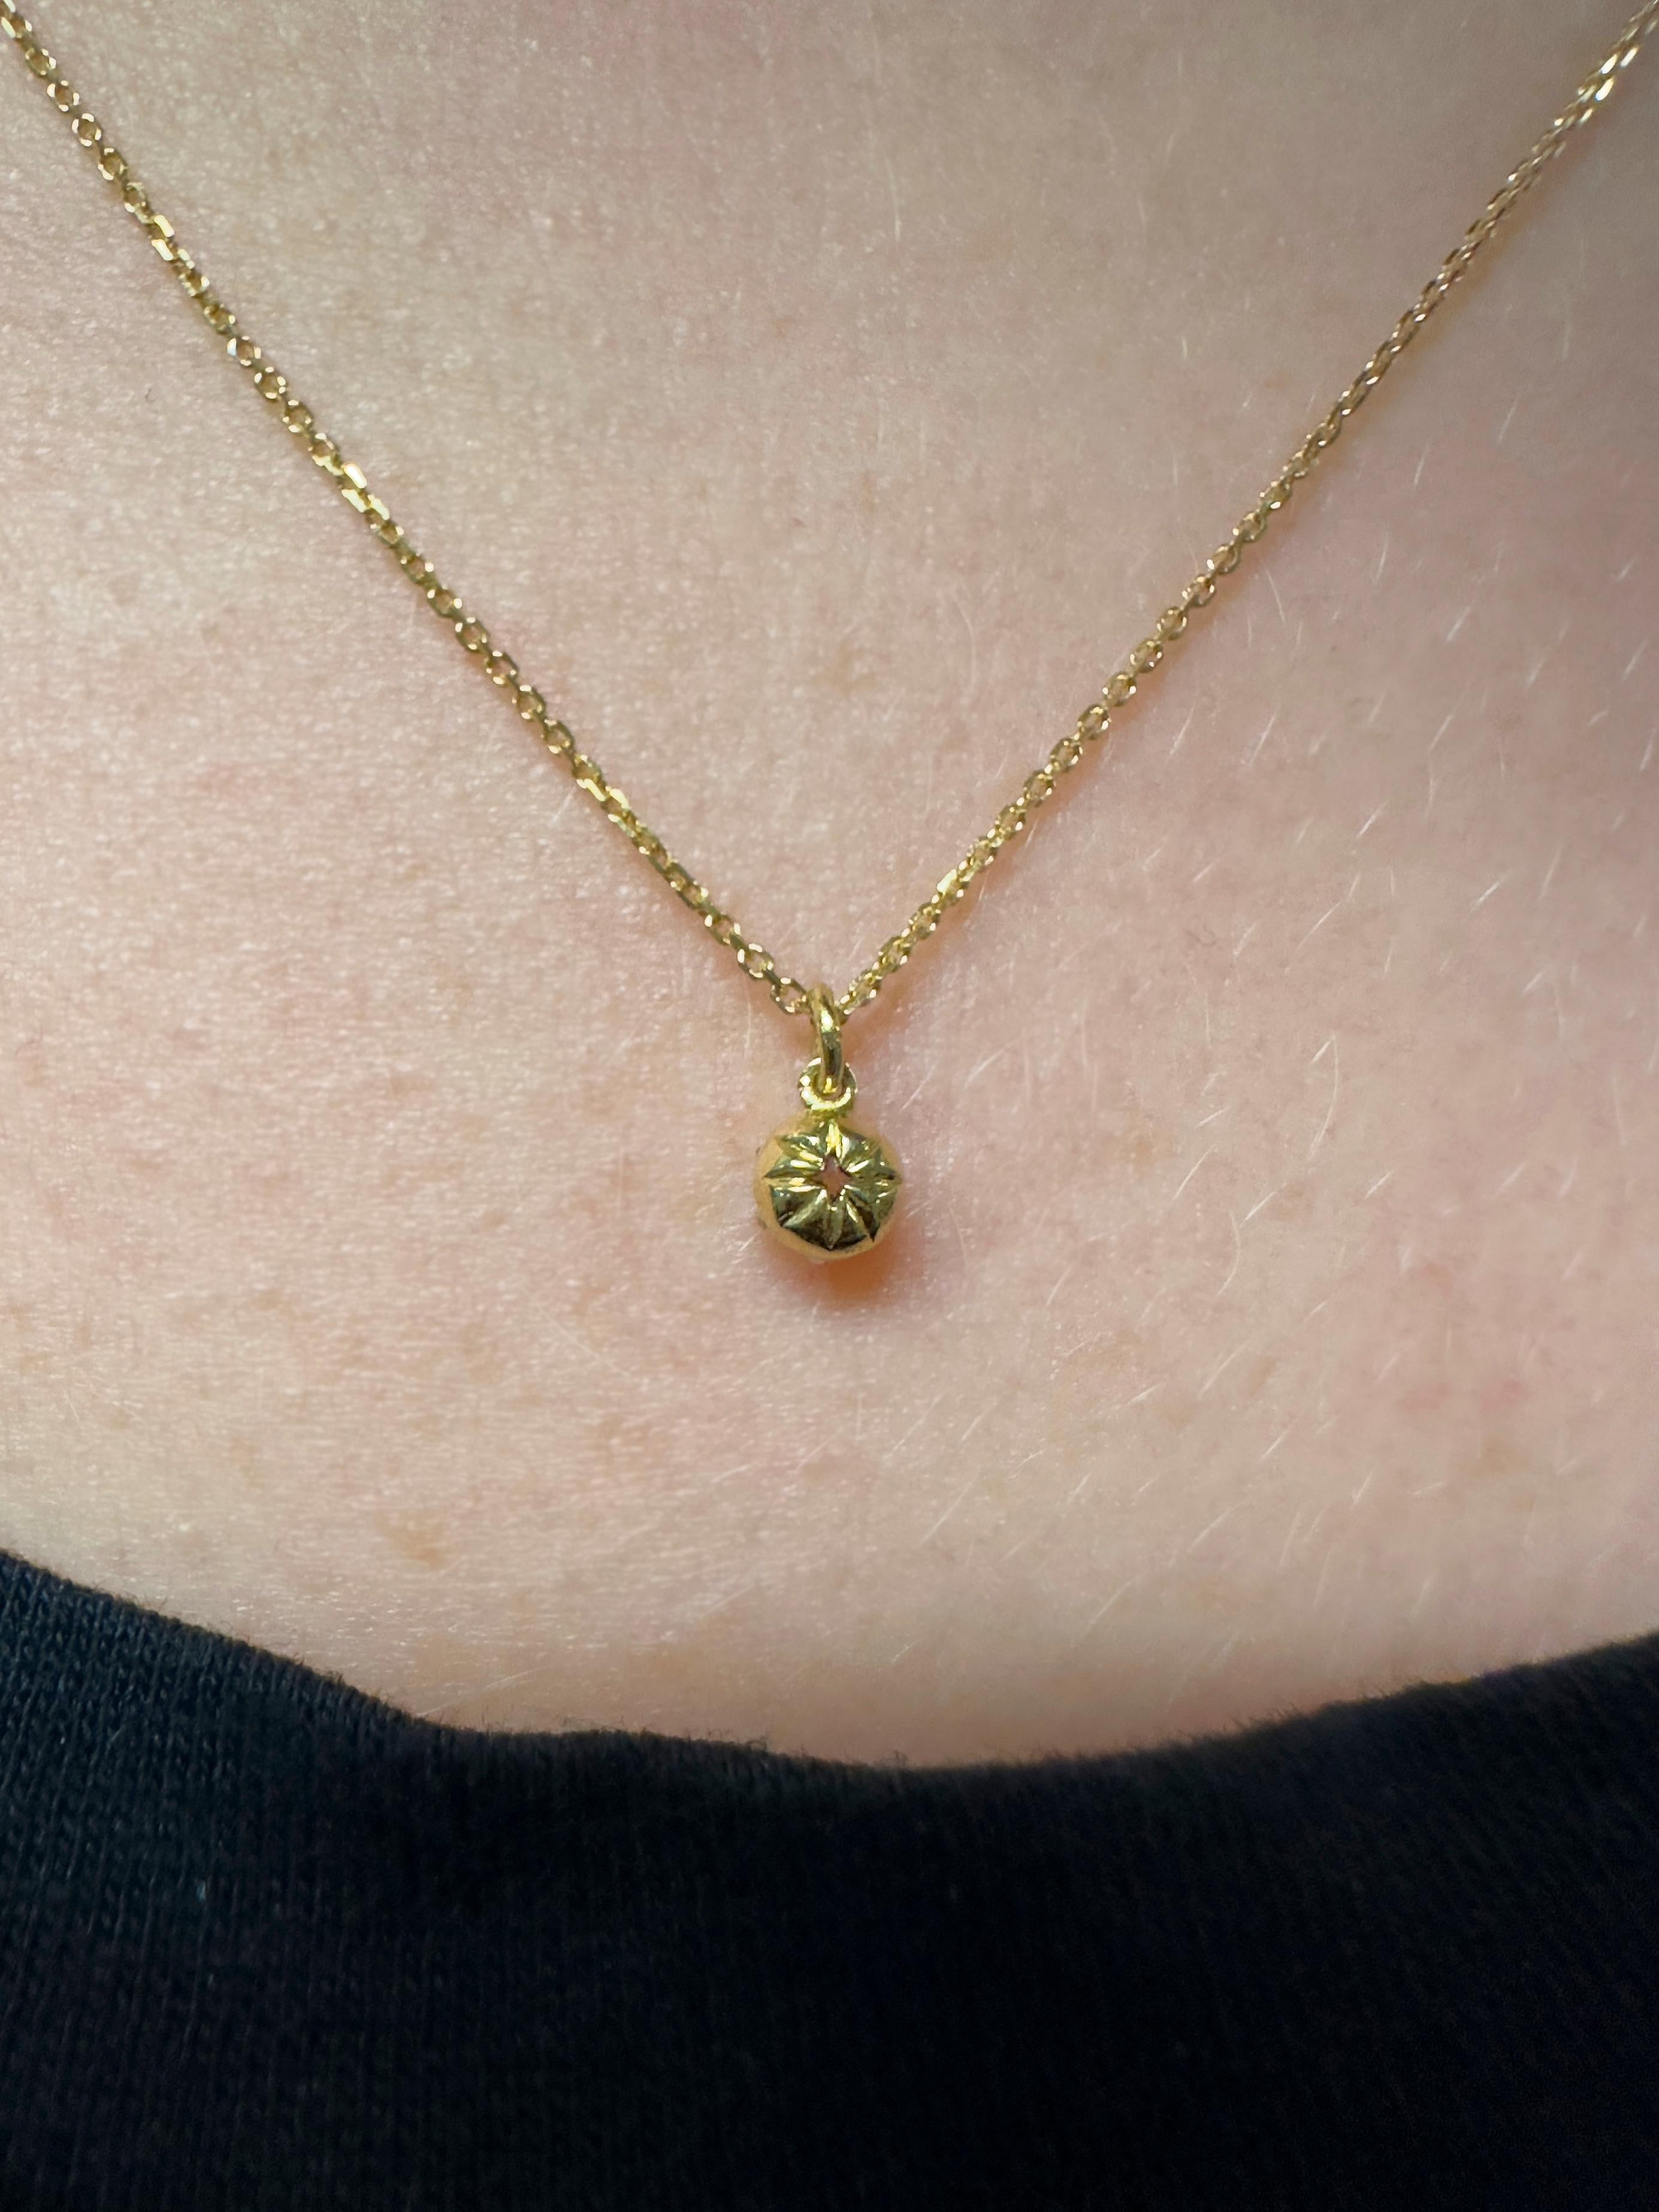 This dainty diamond pendant is a piece you'll never want to take off. Just as lovely on its own as it is layered with other pieces, the delicate diamond cut chain means it feels almost weightless. 

With a gorgeous 'cut-down' setting evocative of